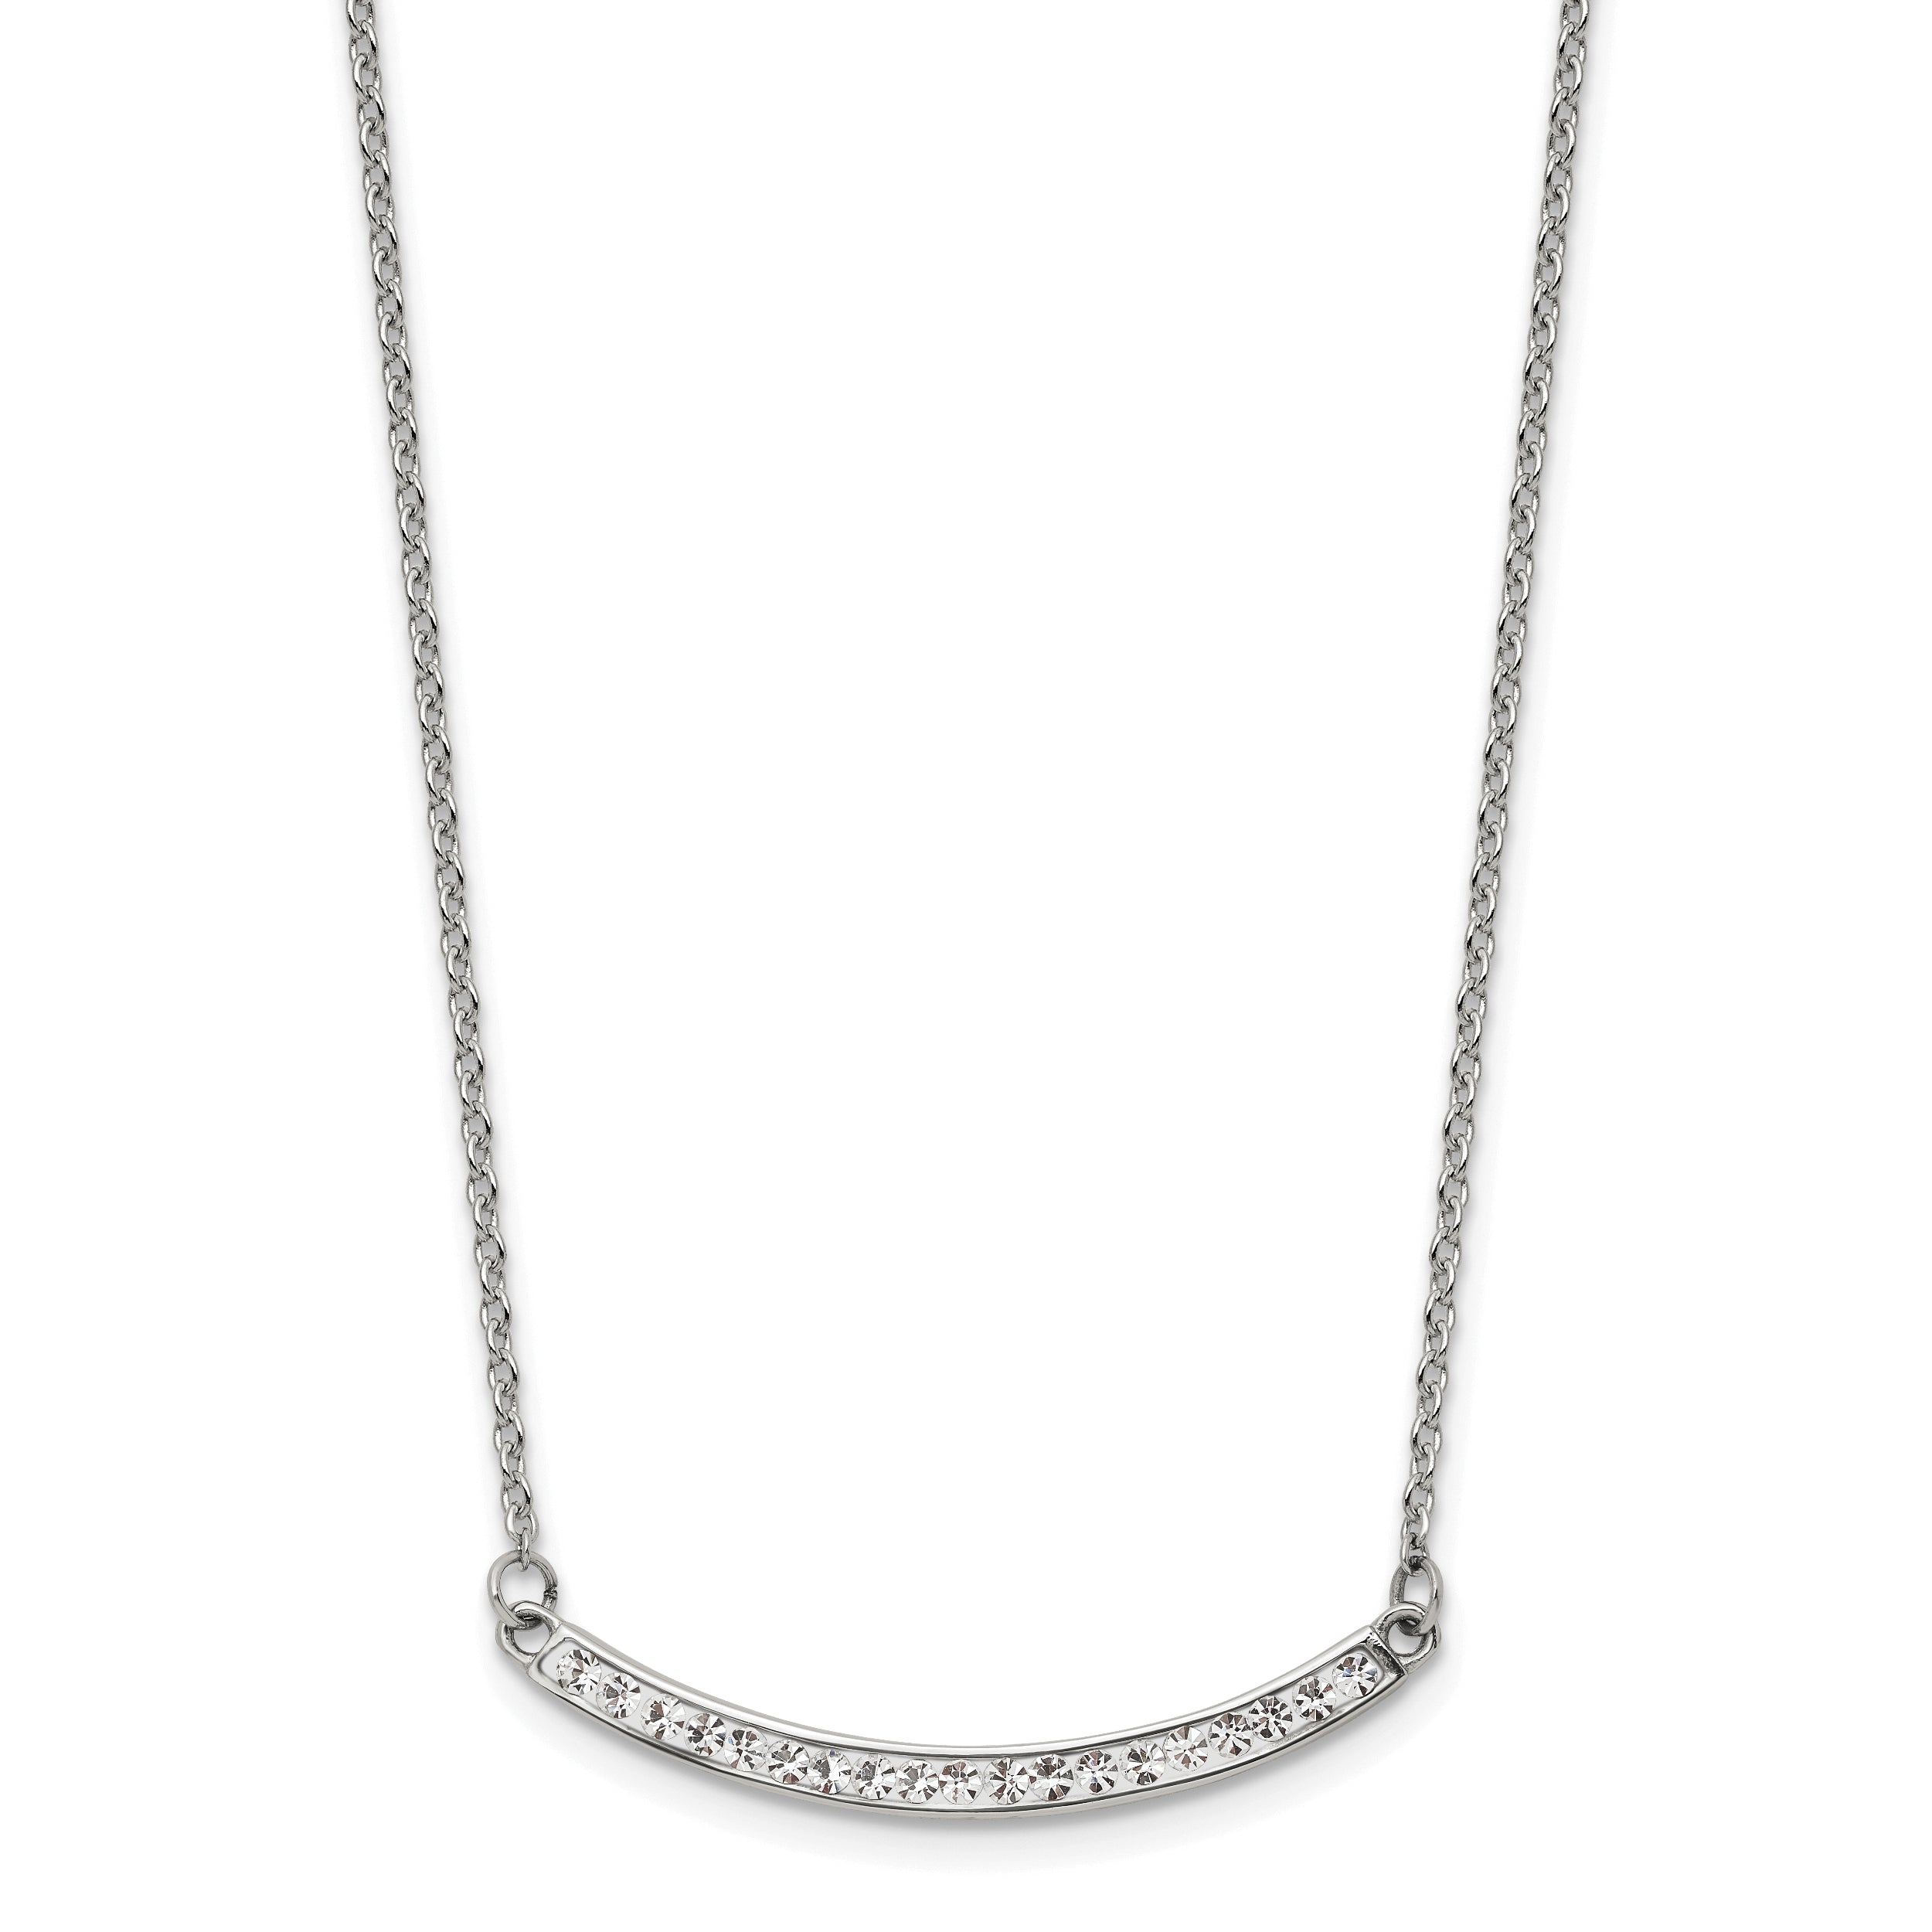 Chisel Stainless Steel Polished Preciosa Crystal Curved Bar on a 17.75 inch Cable Chain with a 2 inch Extension Necklace